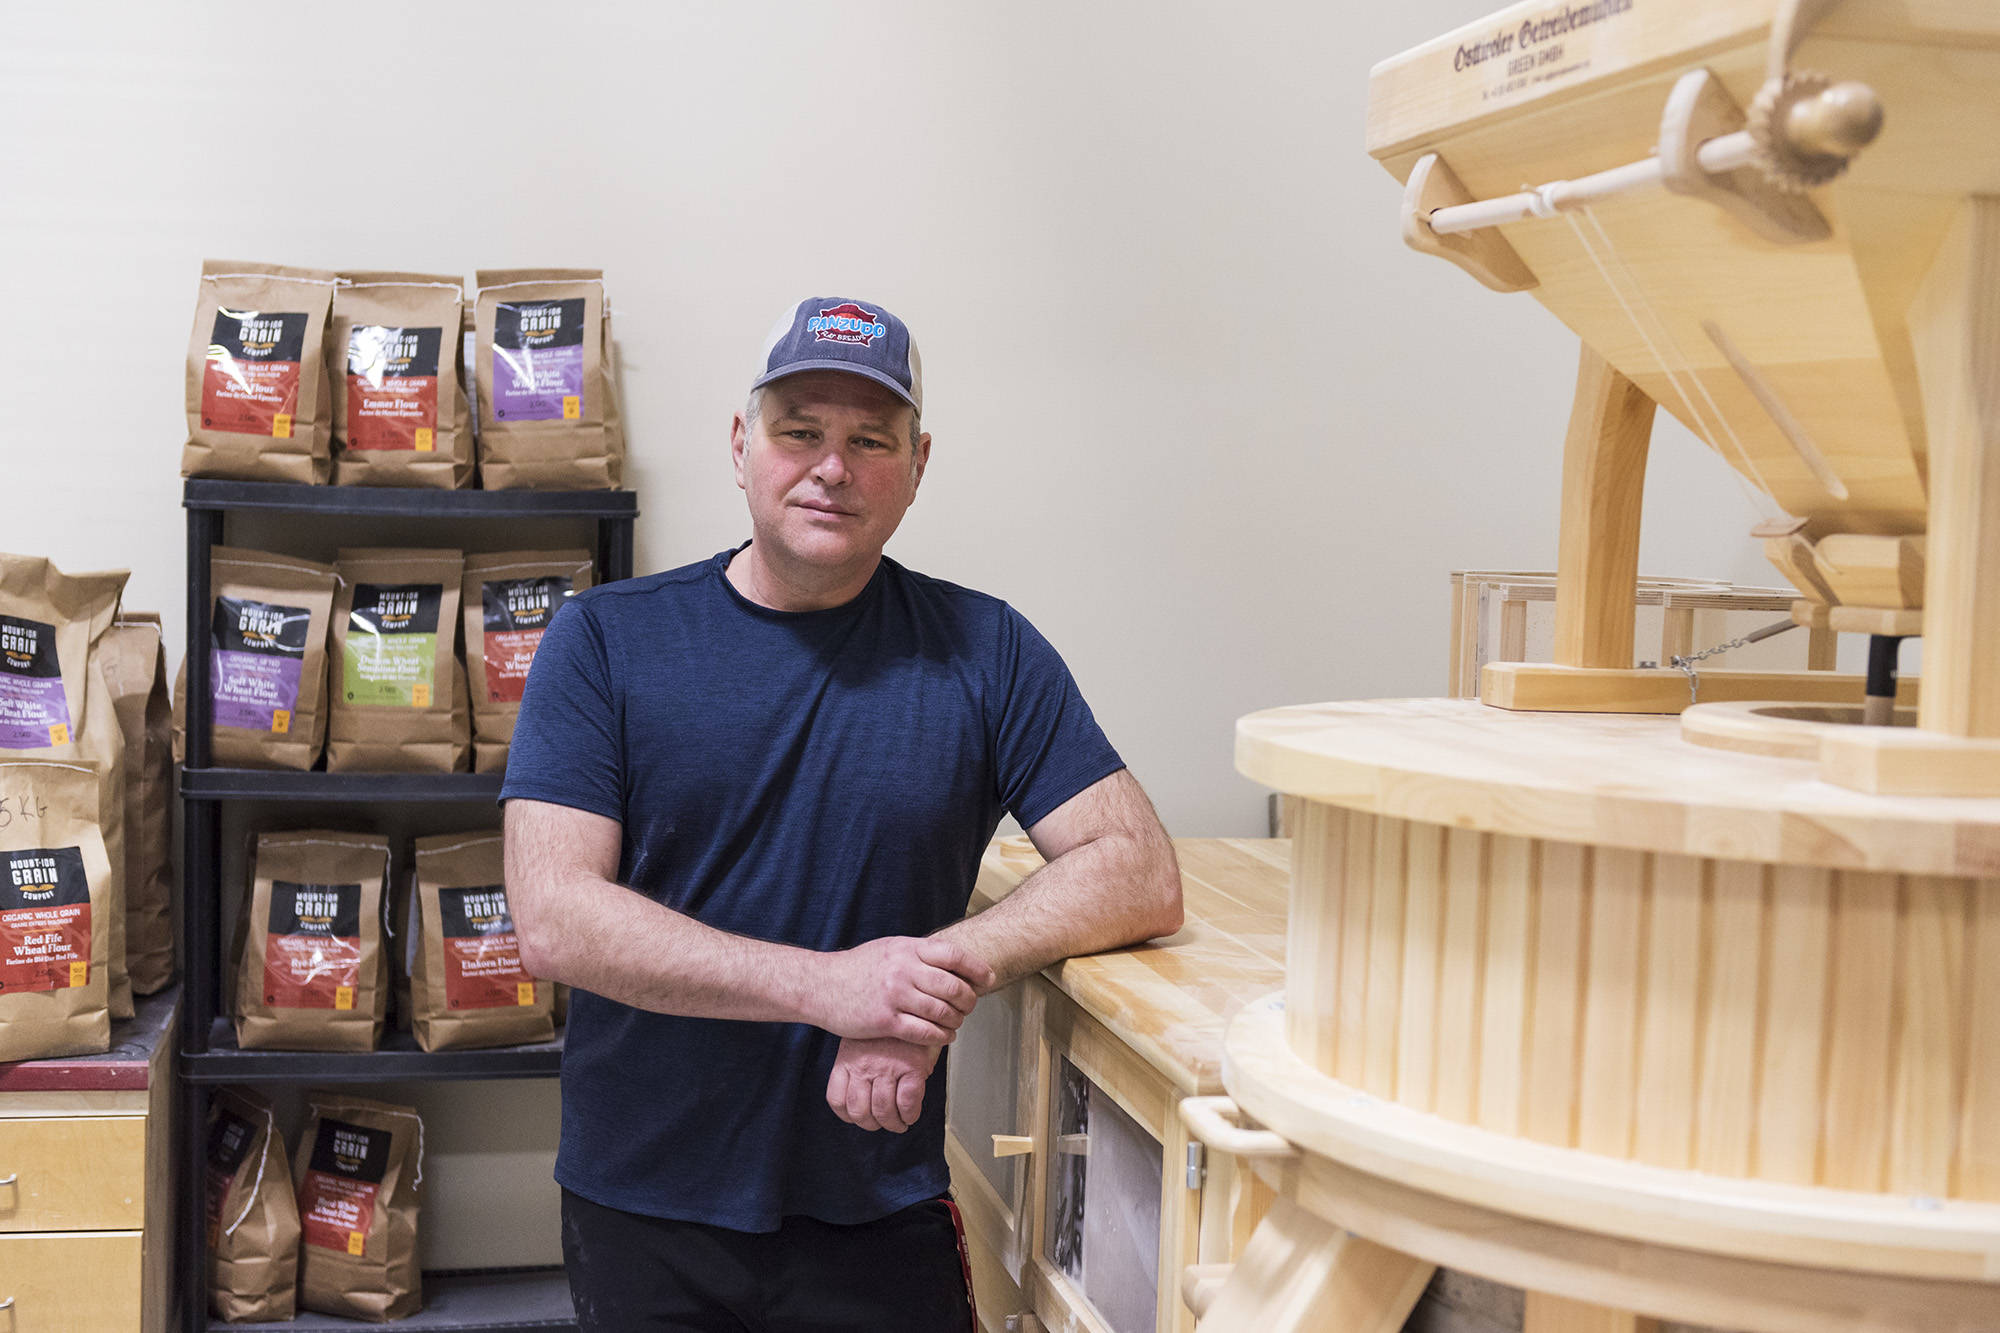 Salmon Arm entrepreneur David Allard stands next to the stone mill he uses to produce organic flours for his Mount Ida Grain Company, which he uses for the pizzas produced by his other business, the Westgate Food Hub, both of which are located in the Westgate Public Market, on Thursday, March 18. 2021. (Lachlan Labere-Salmon Arm Observer)